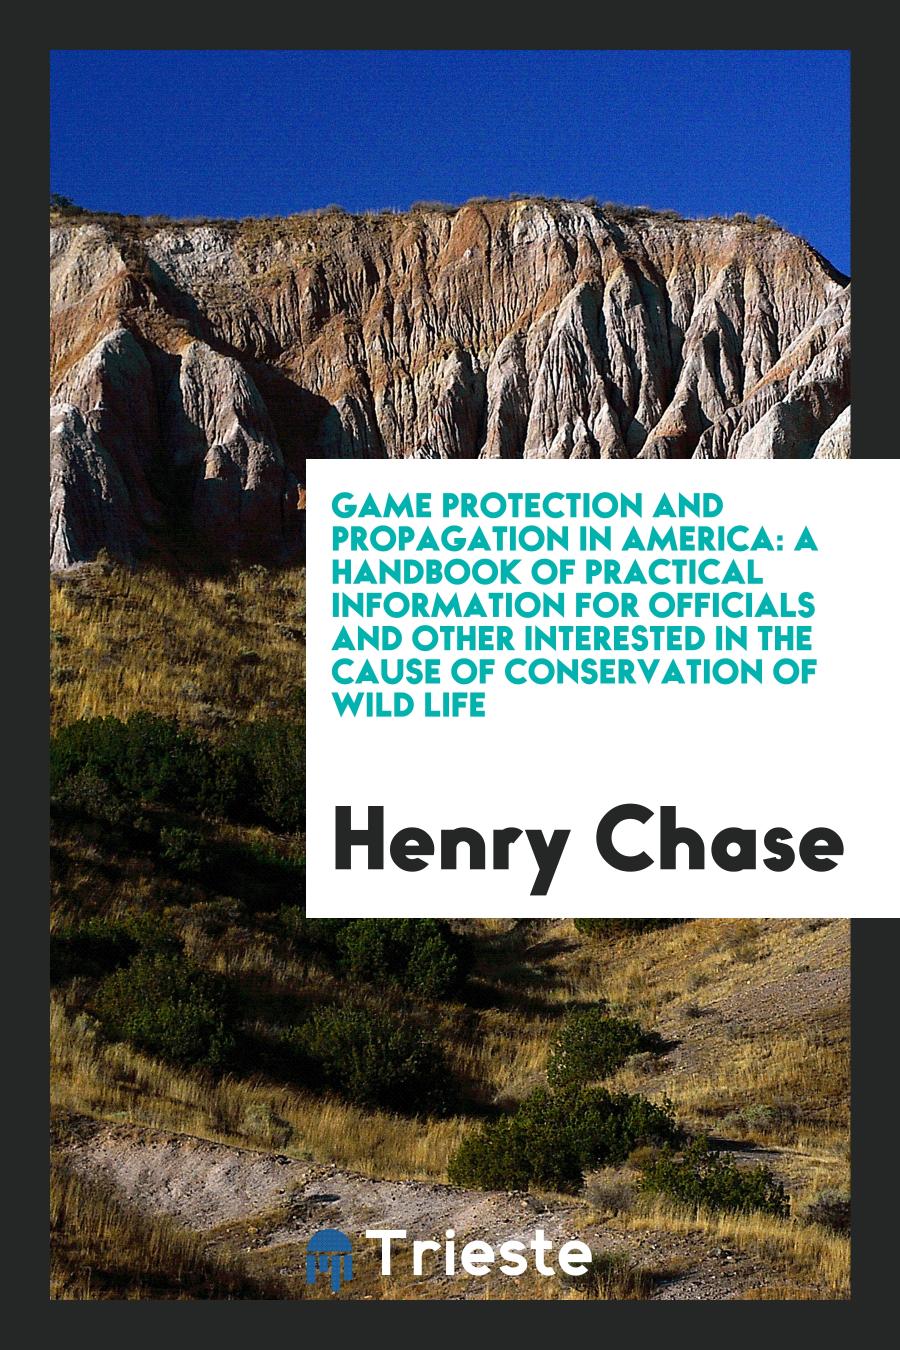 Game Protection and Propagation in America: A Handbook of Practical Information for Officials and Other Interested in the Cause of Conservation of Wild Life